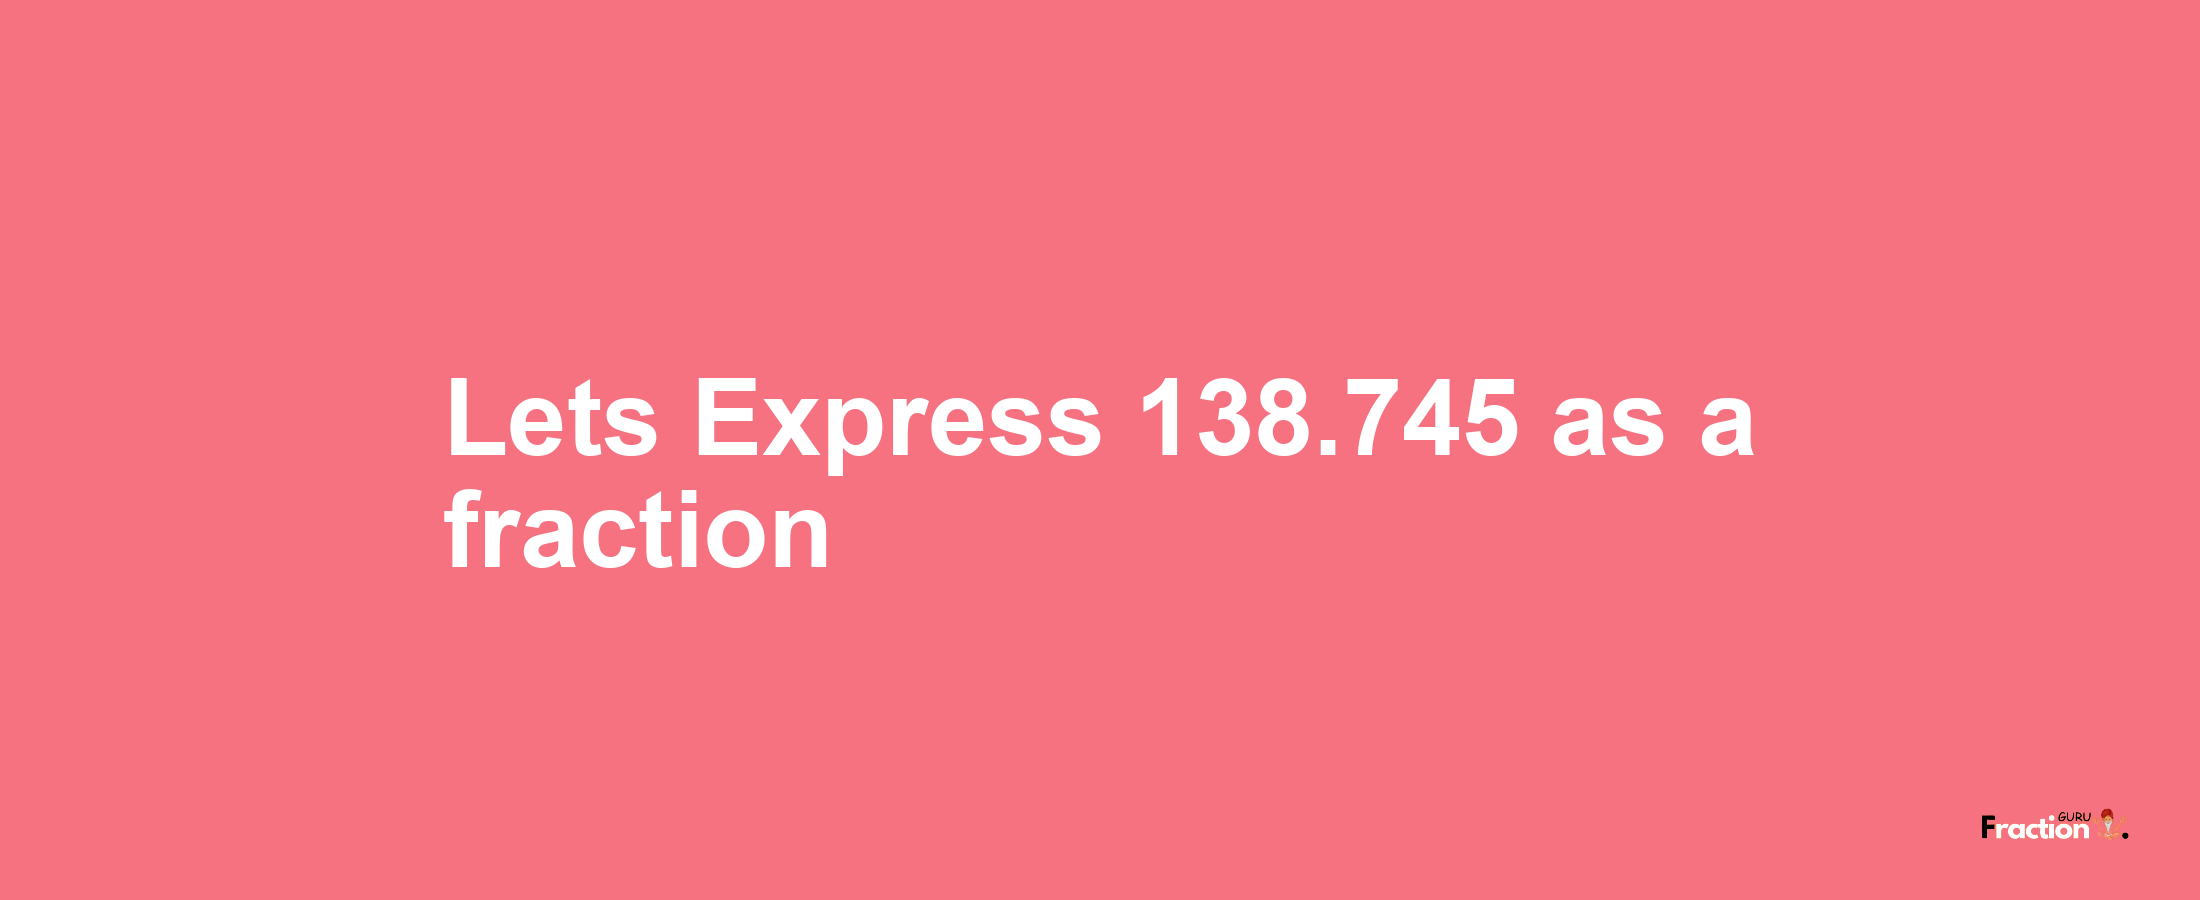 Lets Express 138.745 as afraction